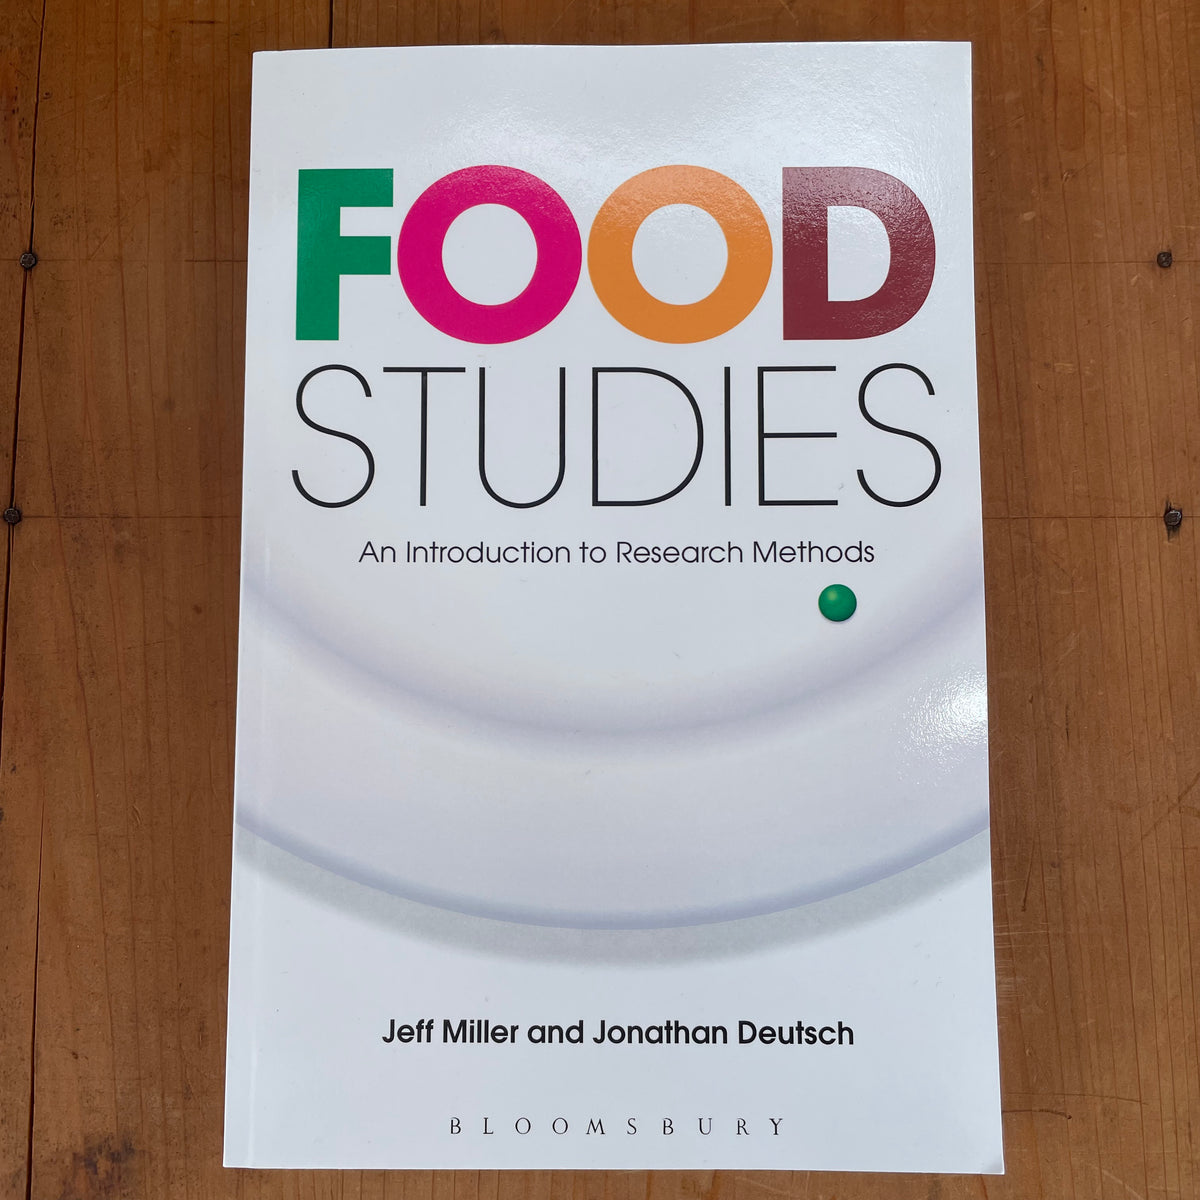 Food Studies: An Introduction to Research Methods - Jeff Miller and Jonathan Deutsch